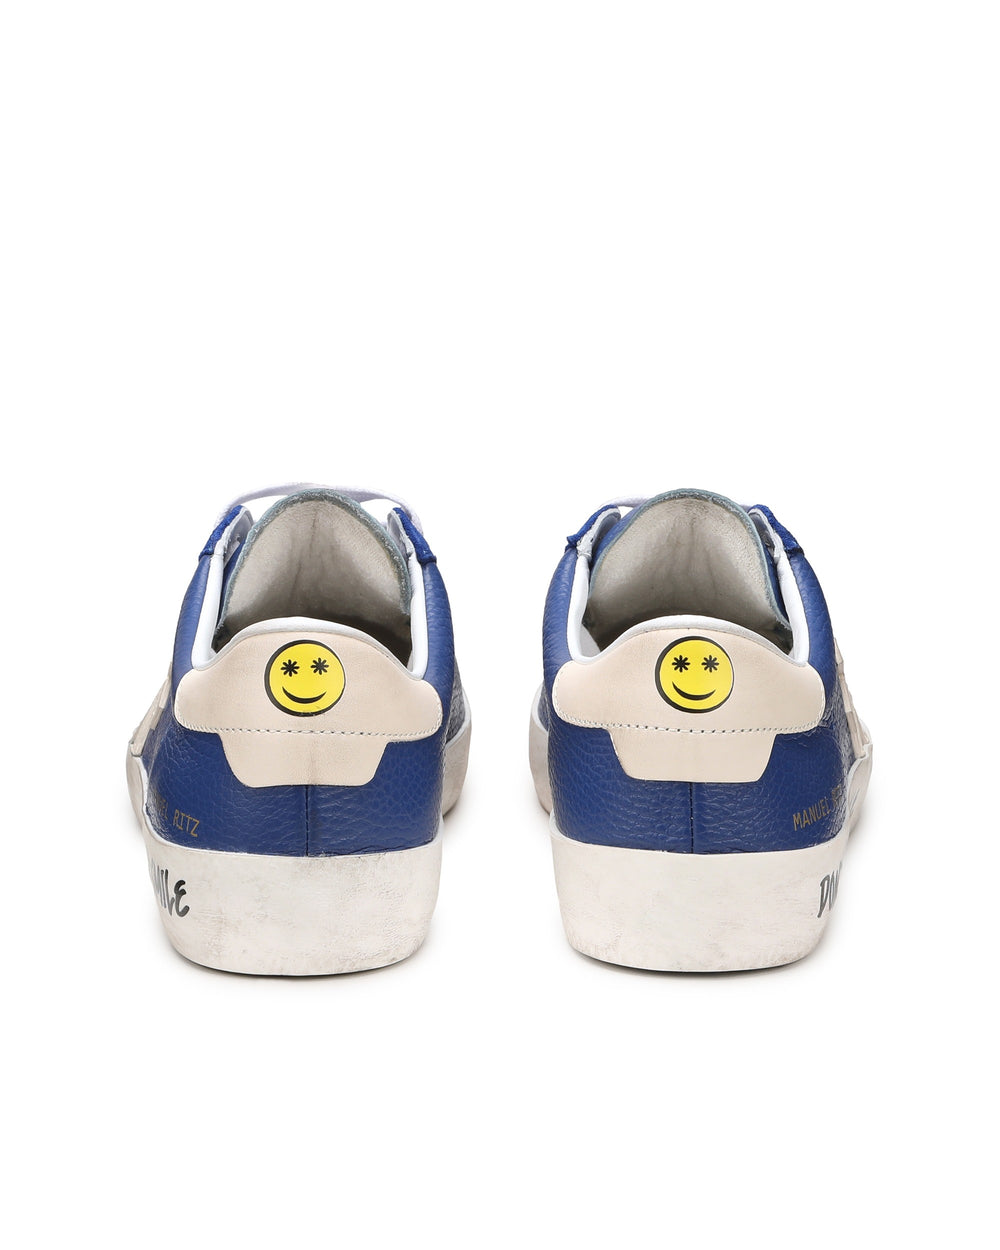 light blue 'don't forget to smile' sneakers